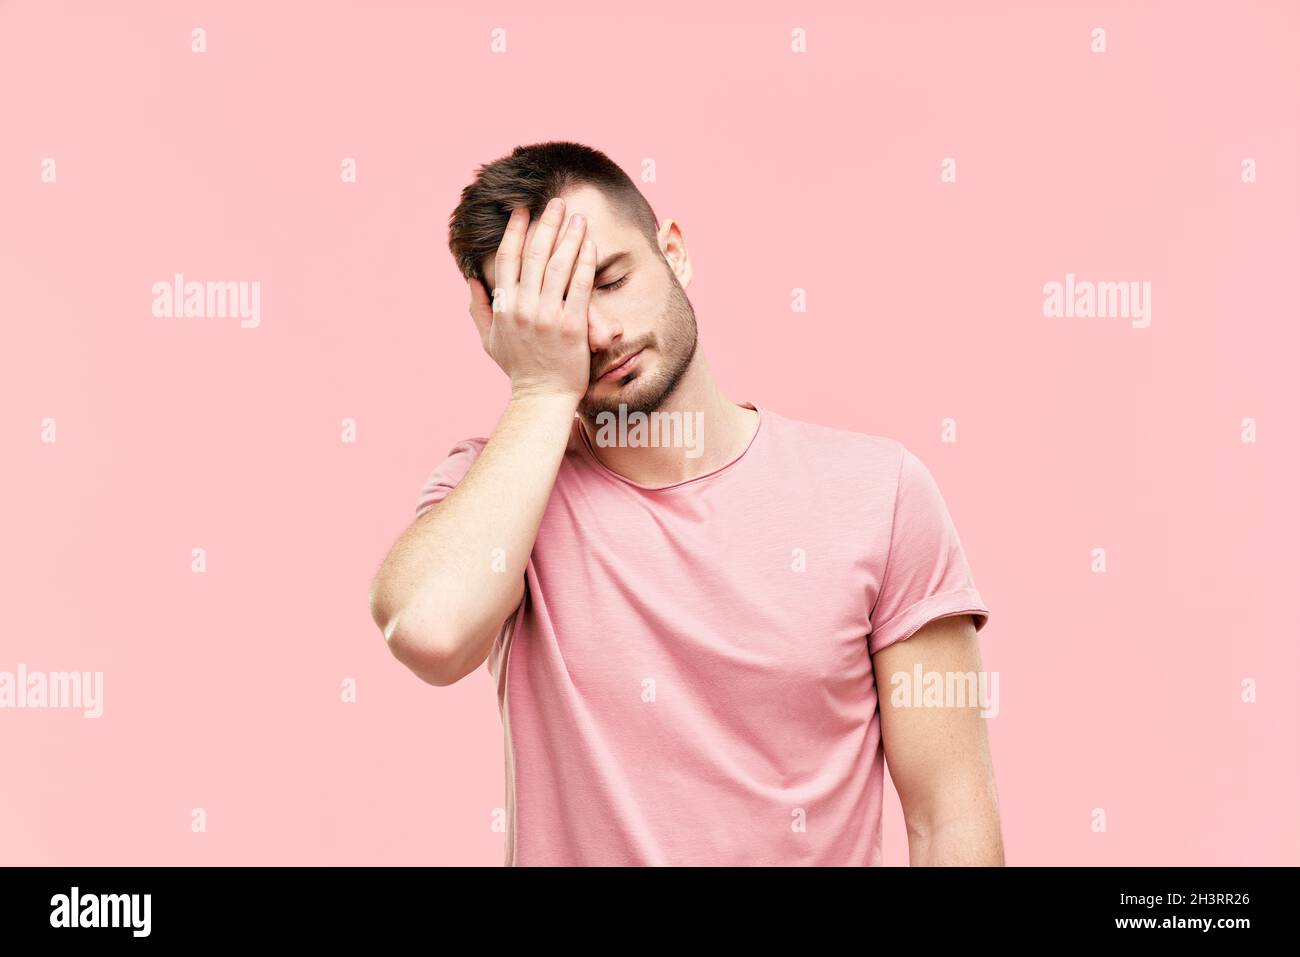 Tired disappointed young man with face palm gesture over pink background Stock Photo